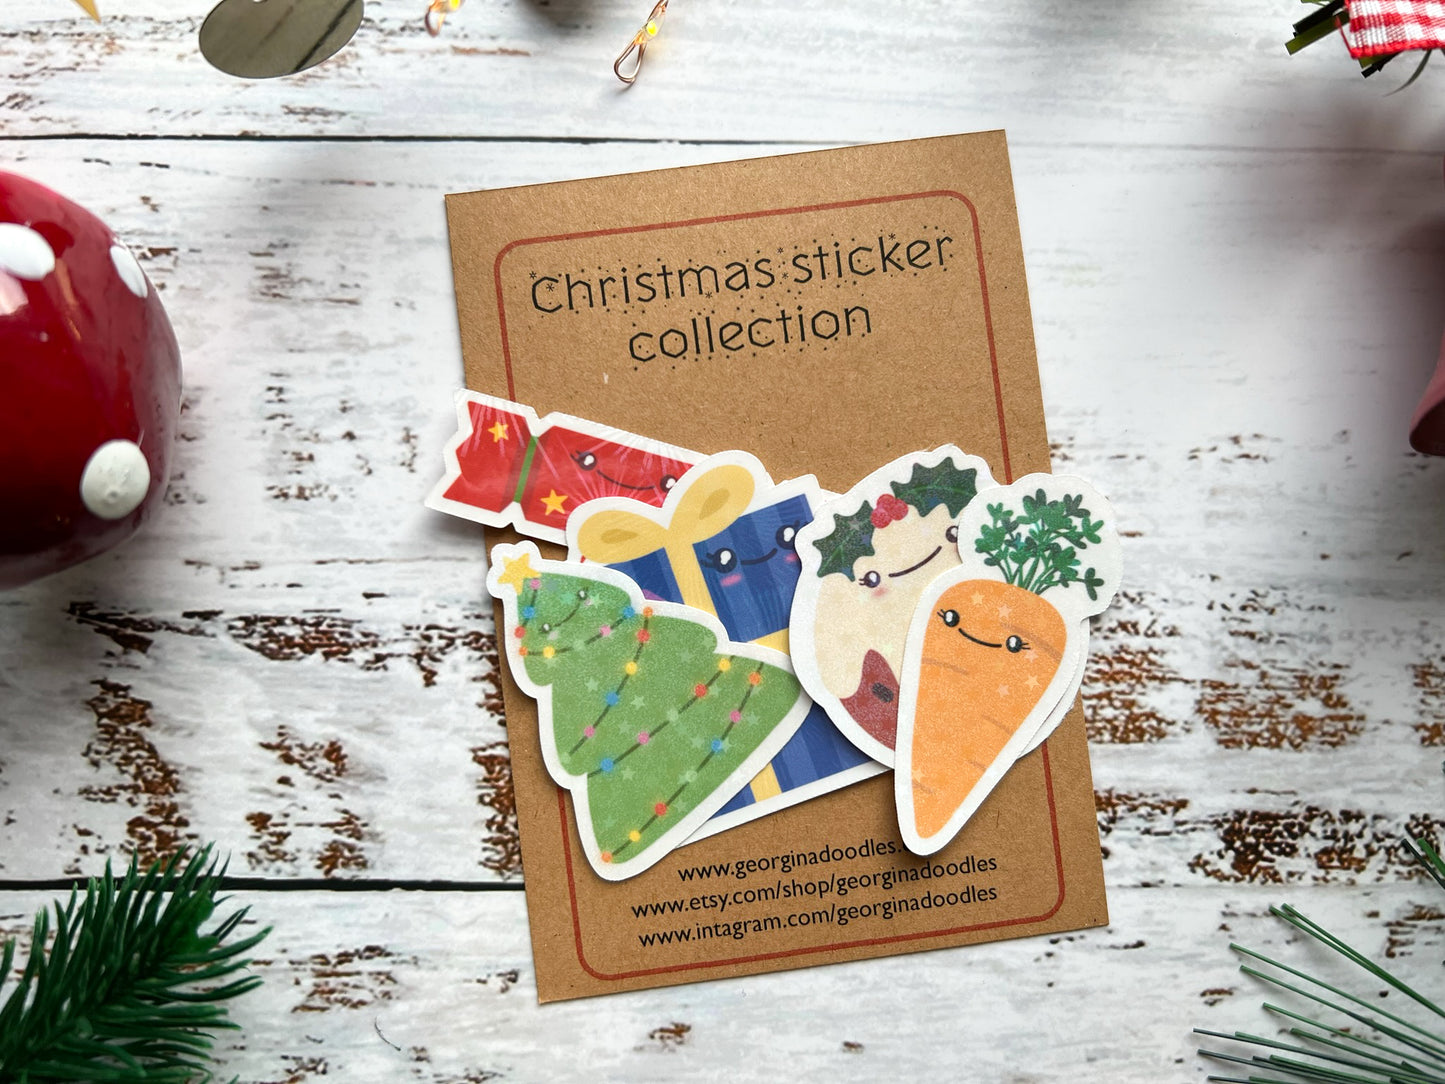 A phot of six cute Christmas stickers with a holographic overlay